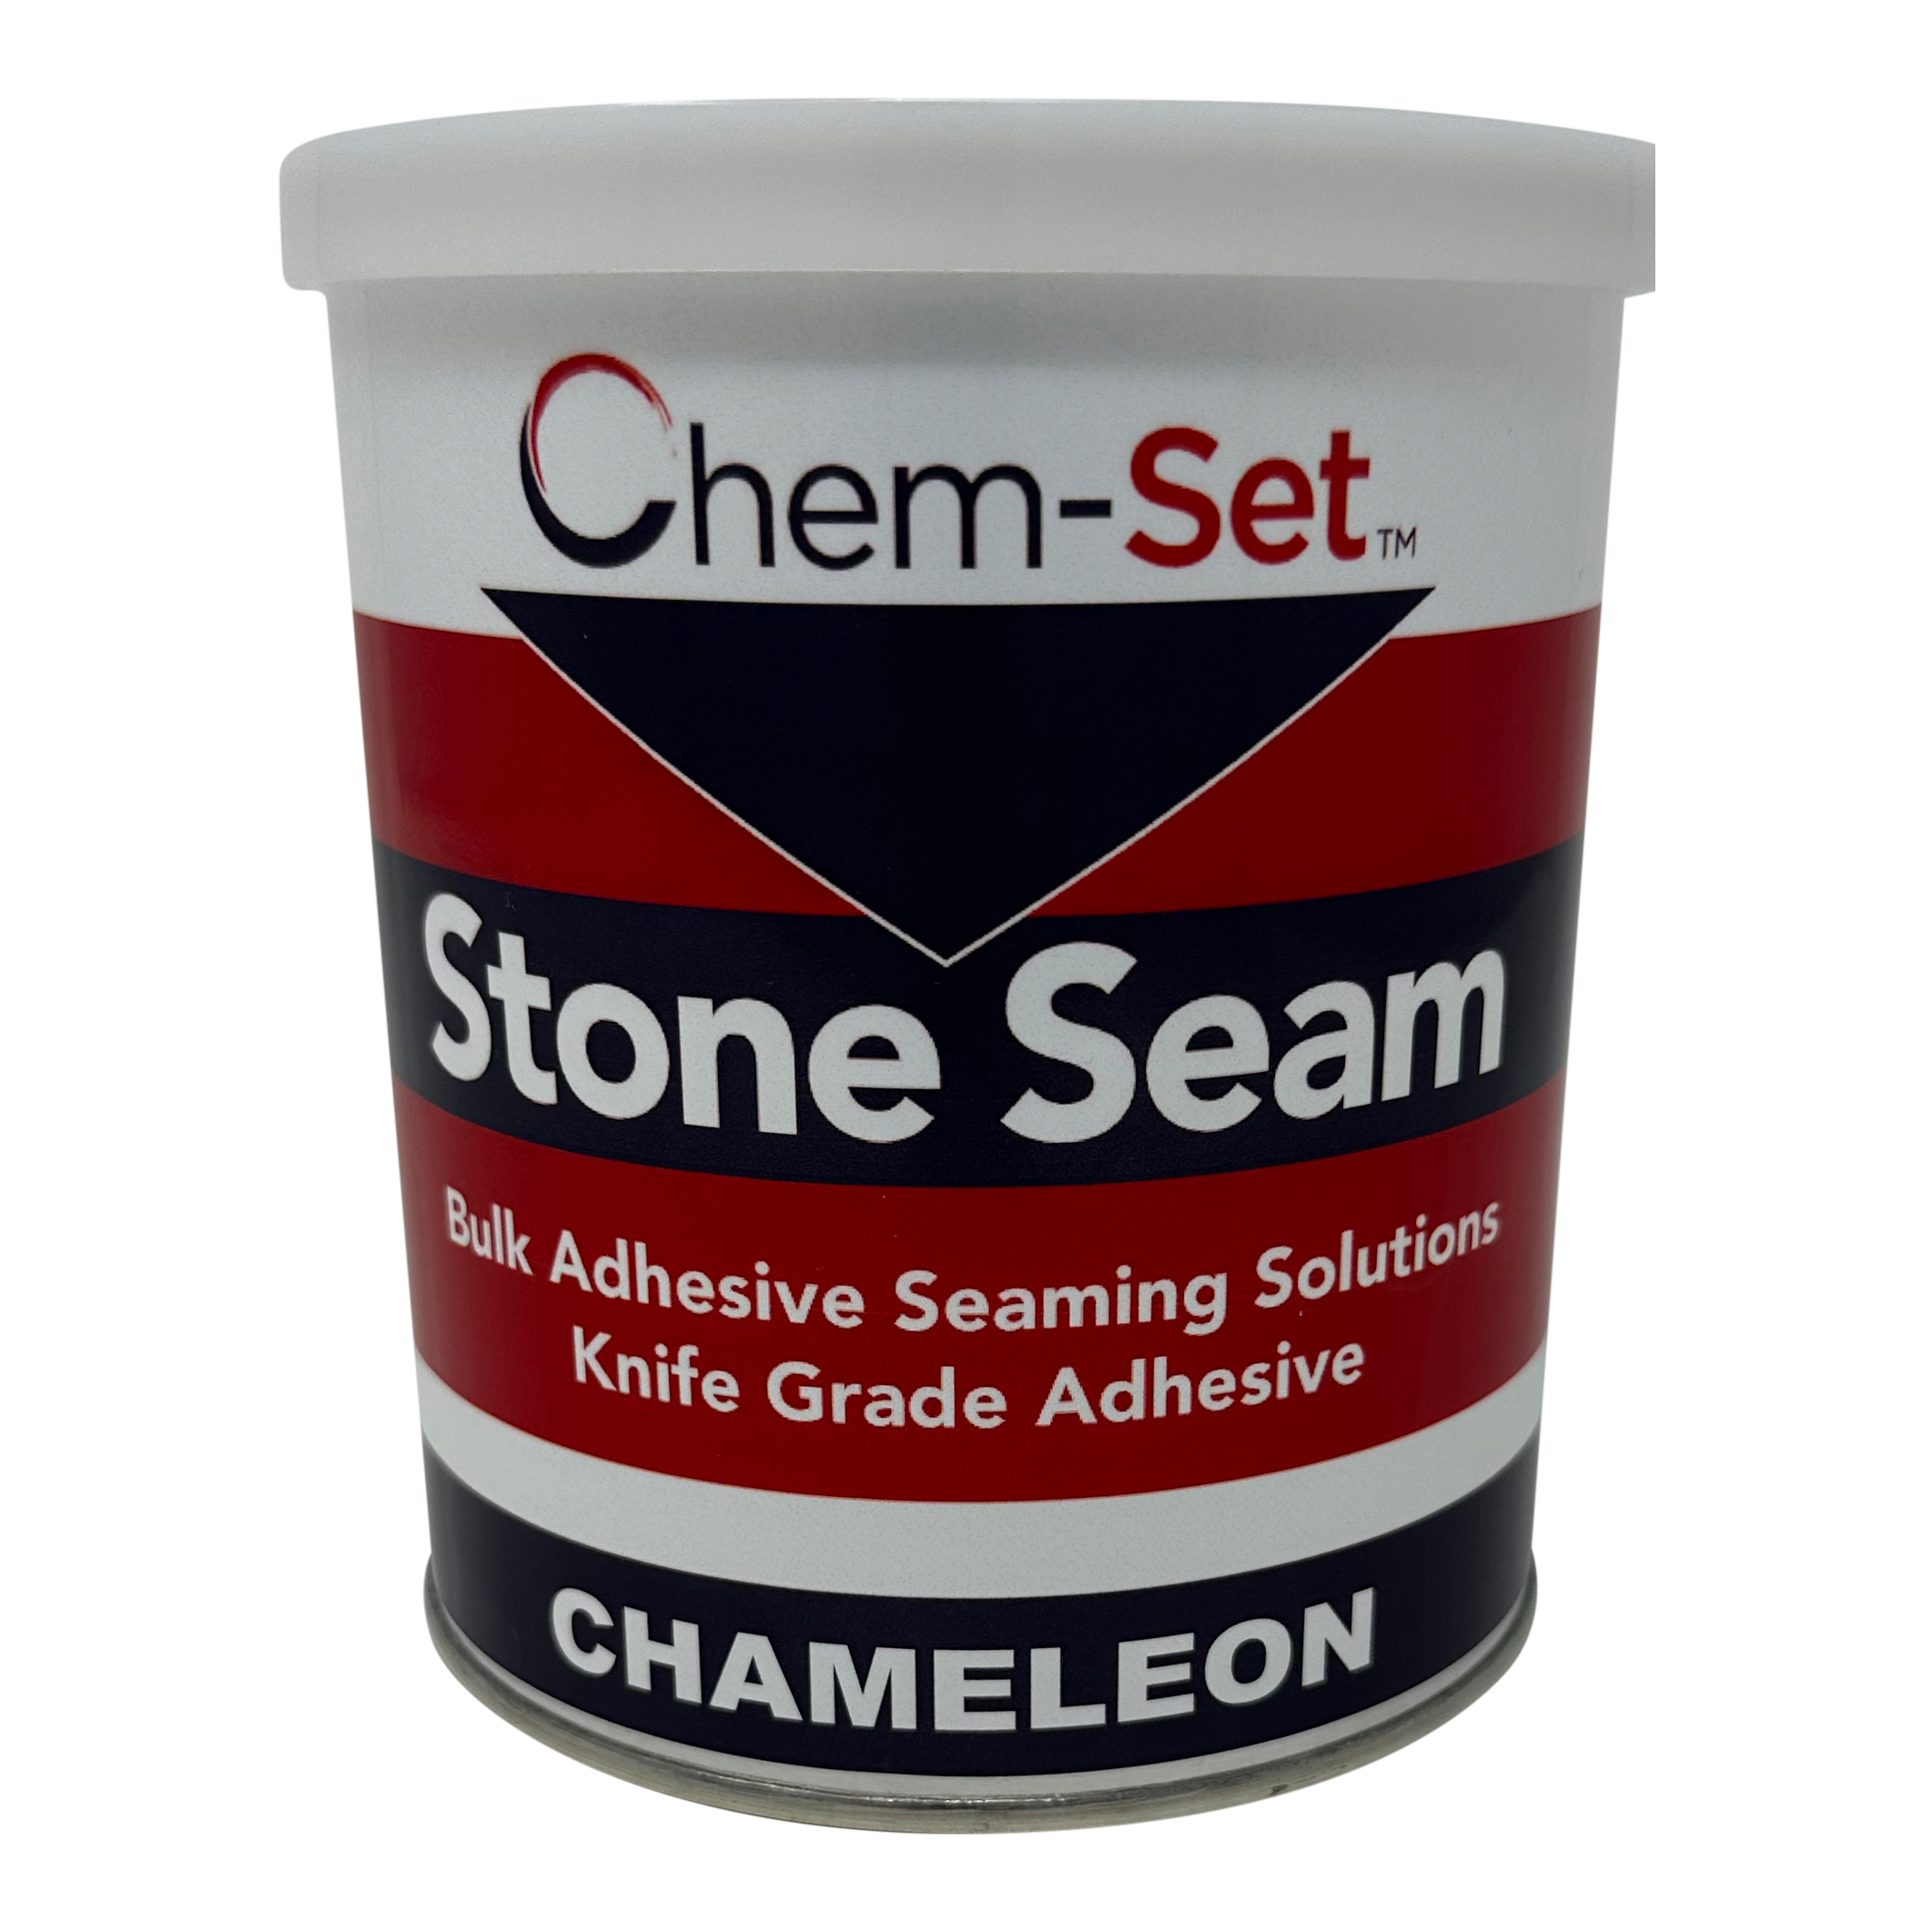 https://www.chemical-concepts.com/wp-content/uploads/2023/03/Stone-Seam-Chameleon.png